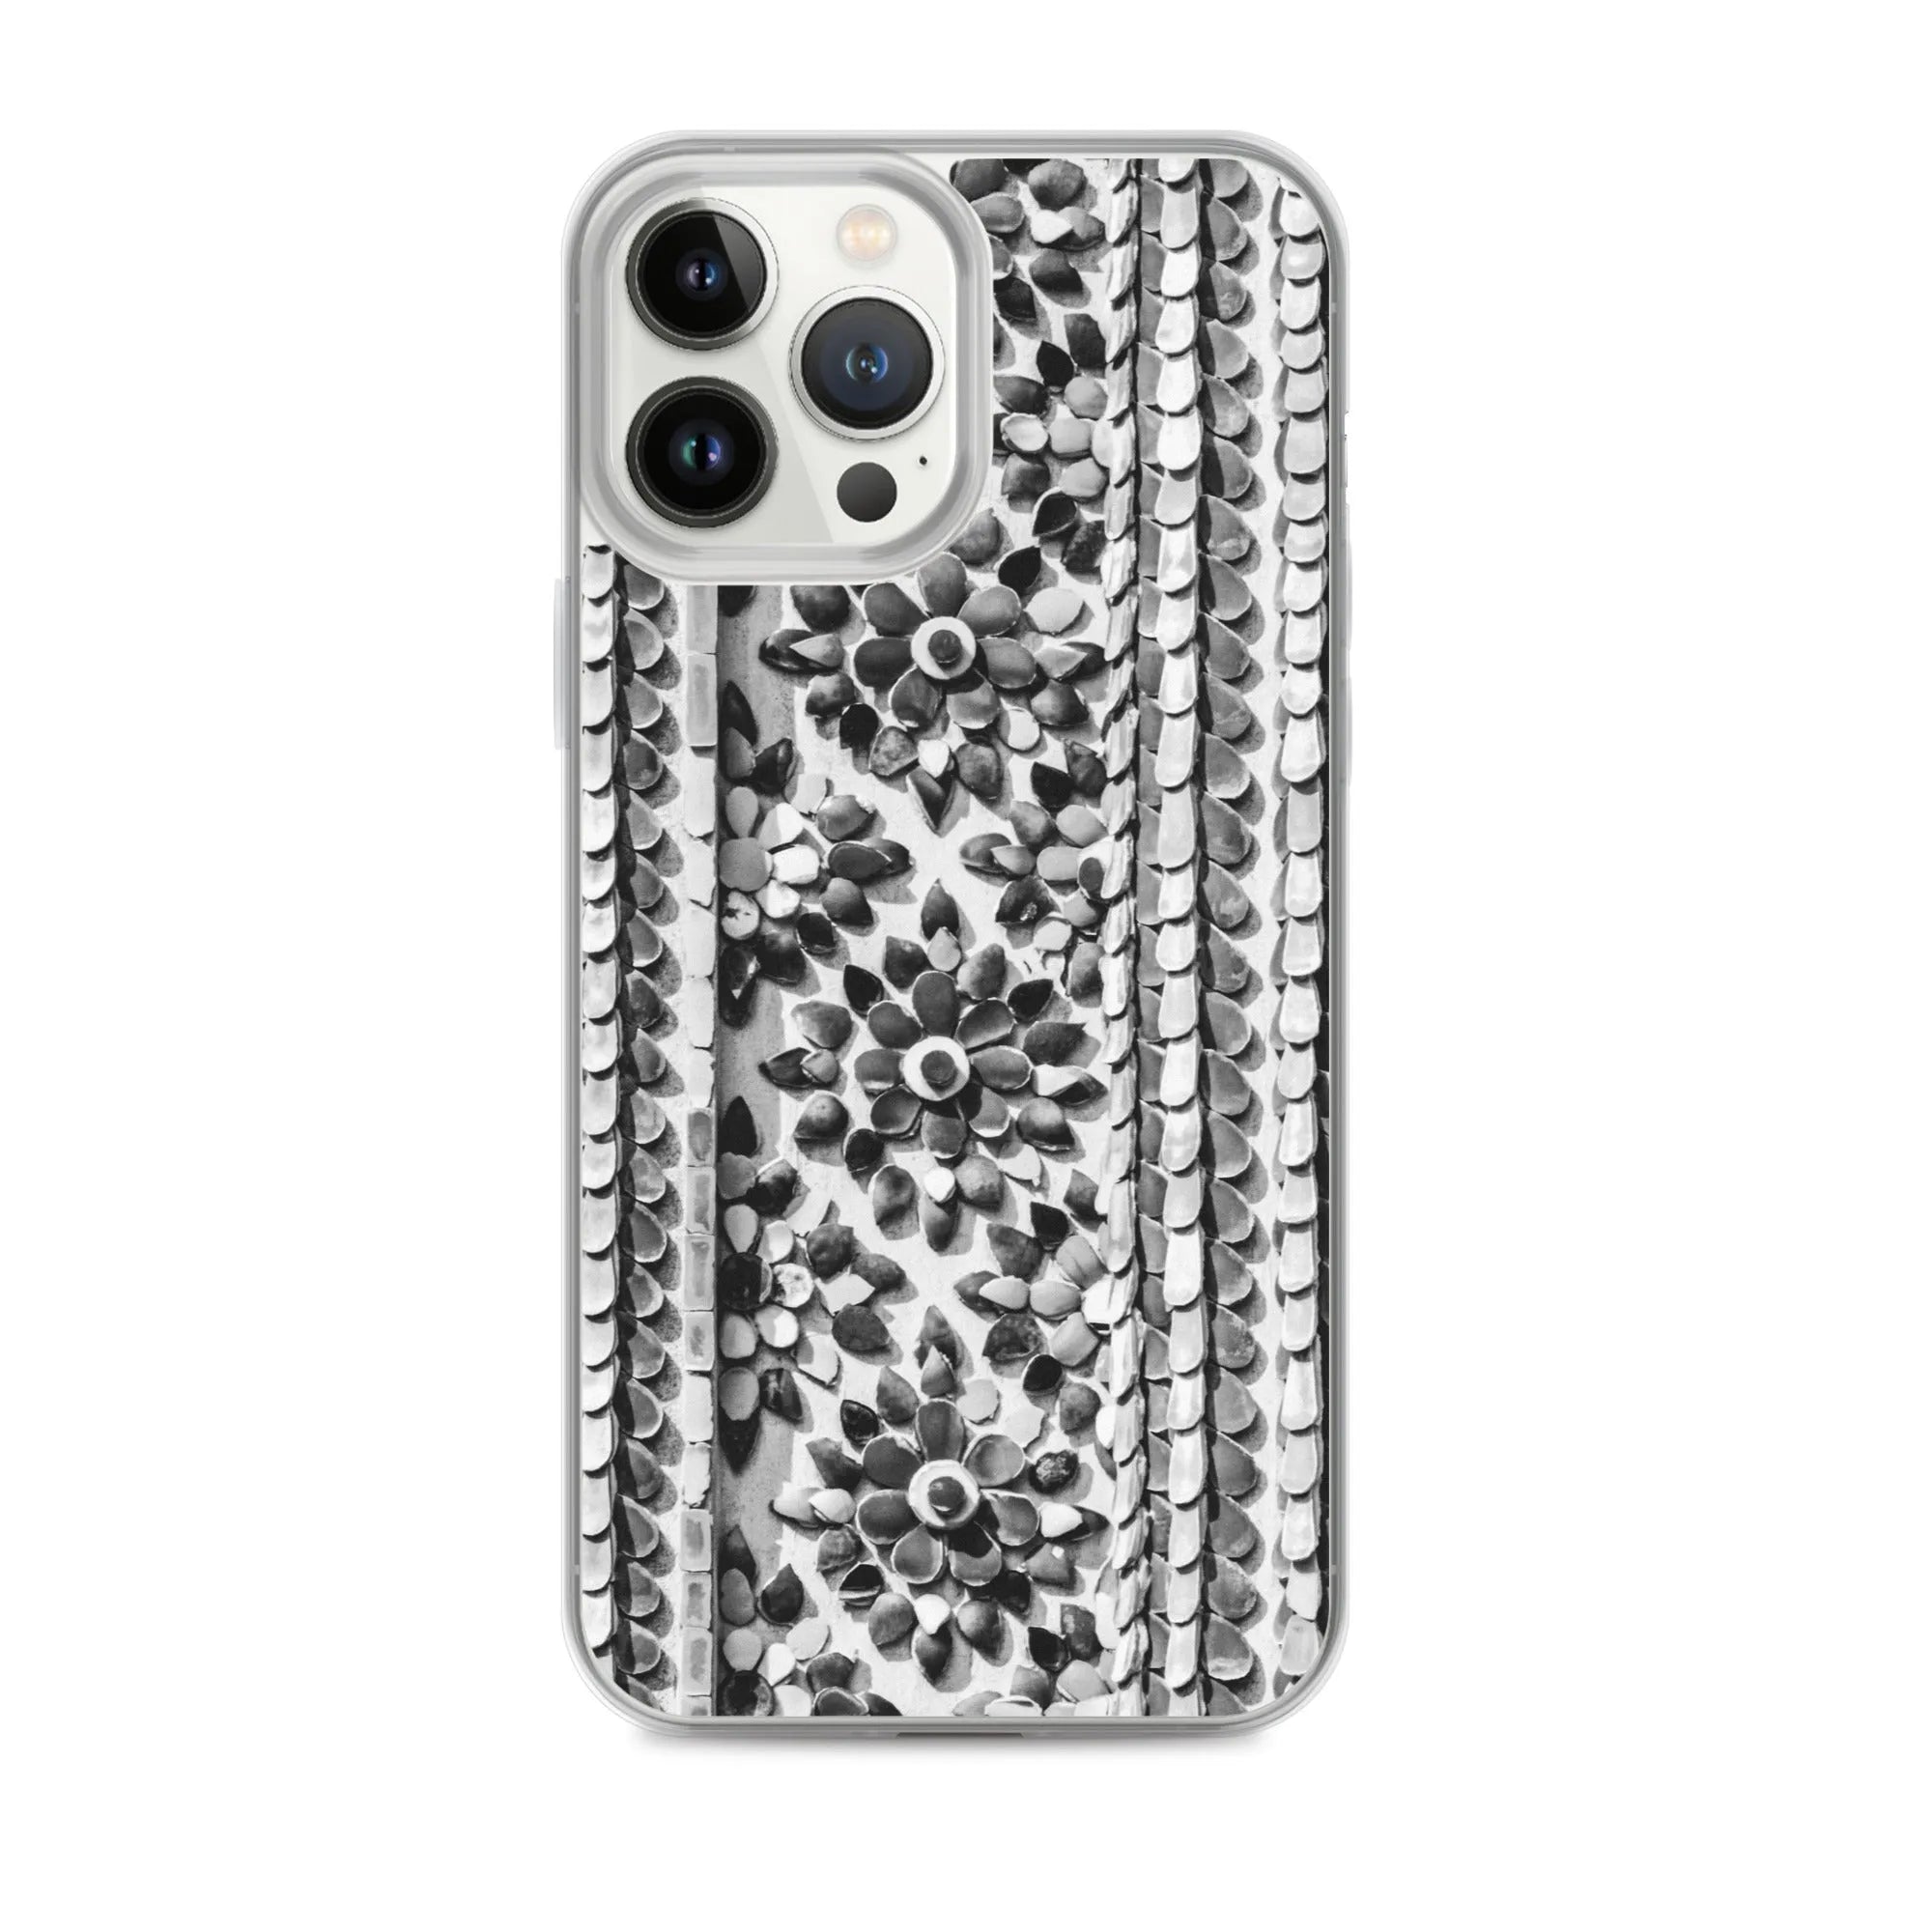 Flower Beds Pattern Iphone Case - Black And White - Iphone 13 Pro Max - Mobile Phone Cases - Aesthetic Art